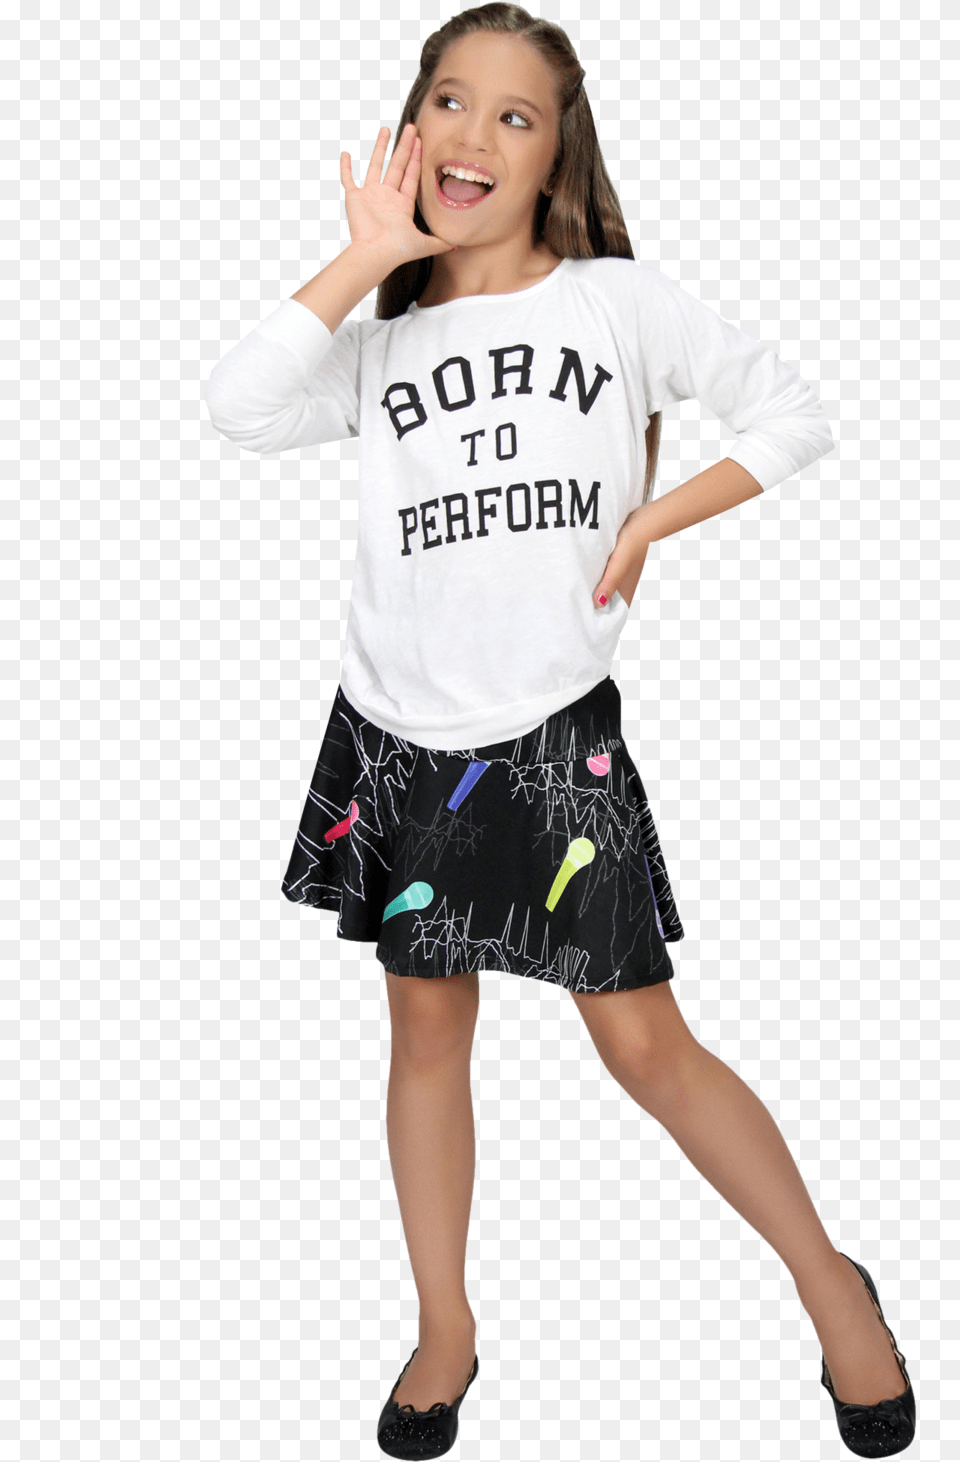 Mackenzie Ziegler Normal Clothes, T-shirt, Clothing, Skirt, Person Png